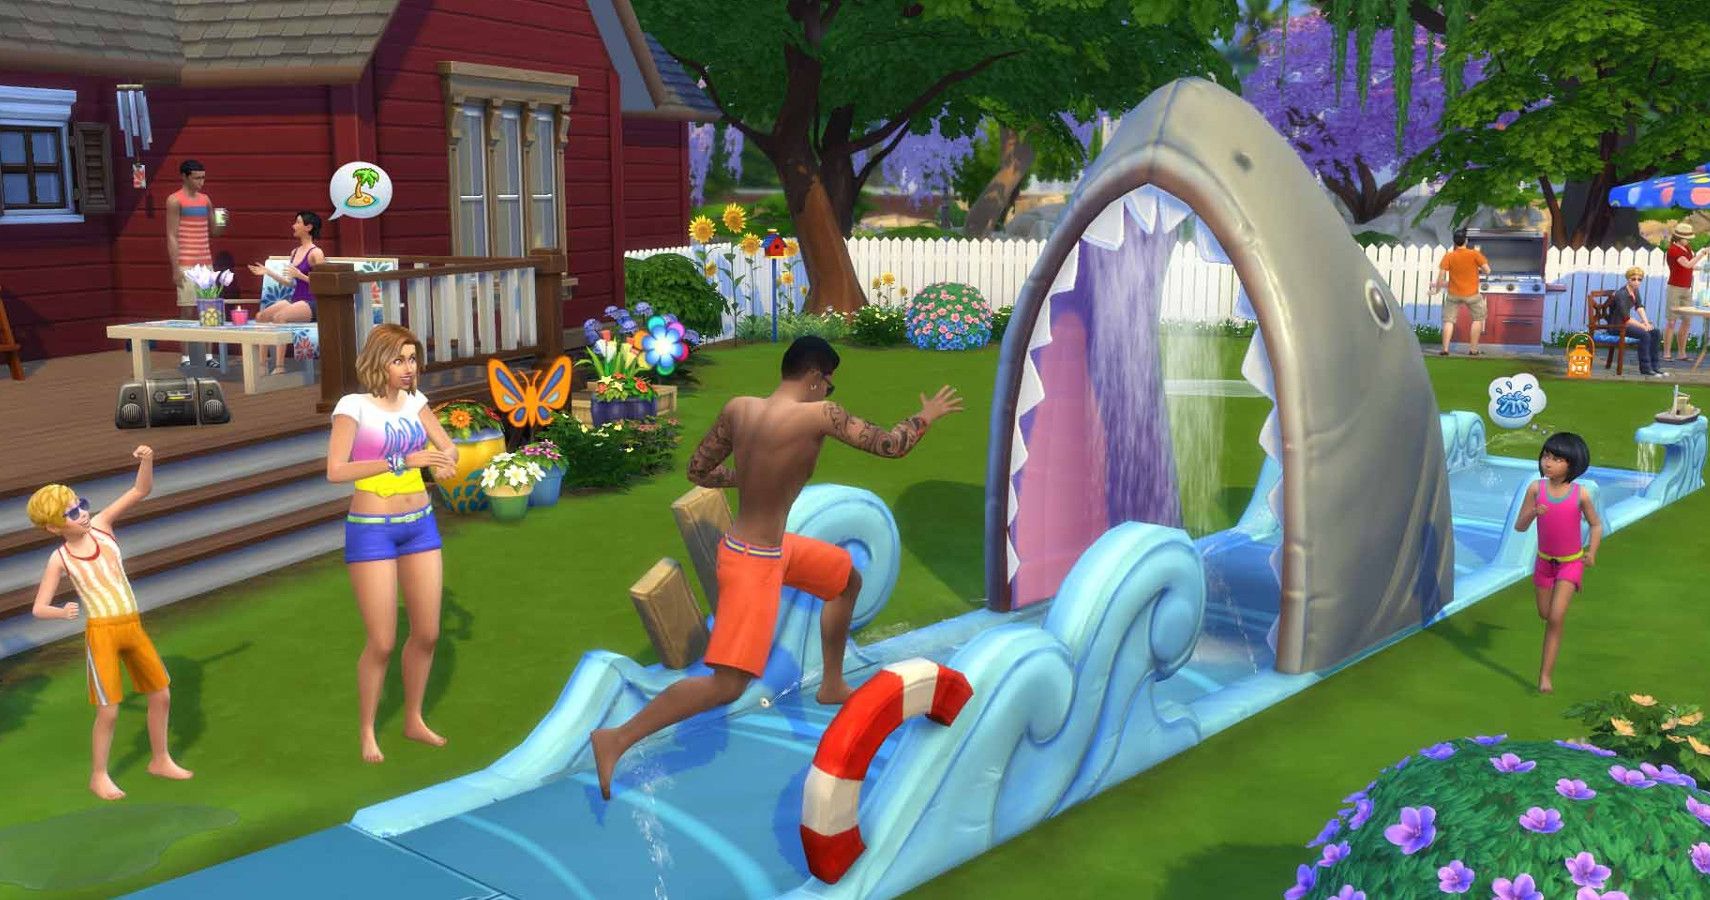 A family playing slip n slide in the yard